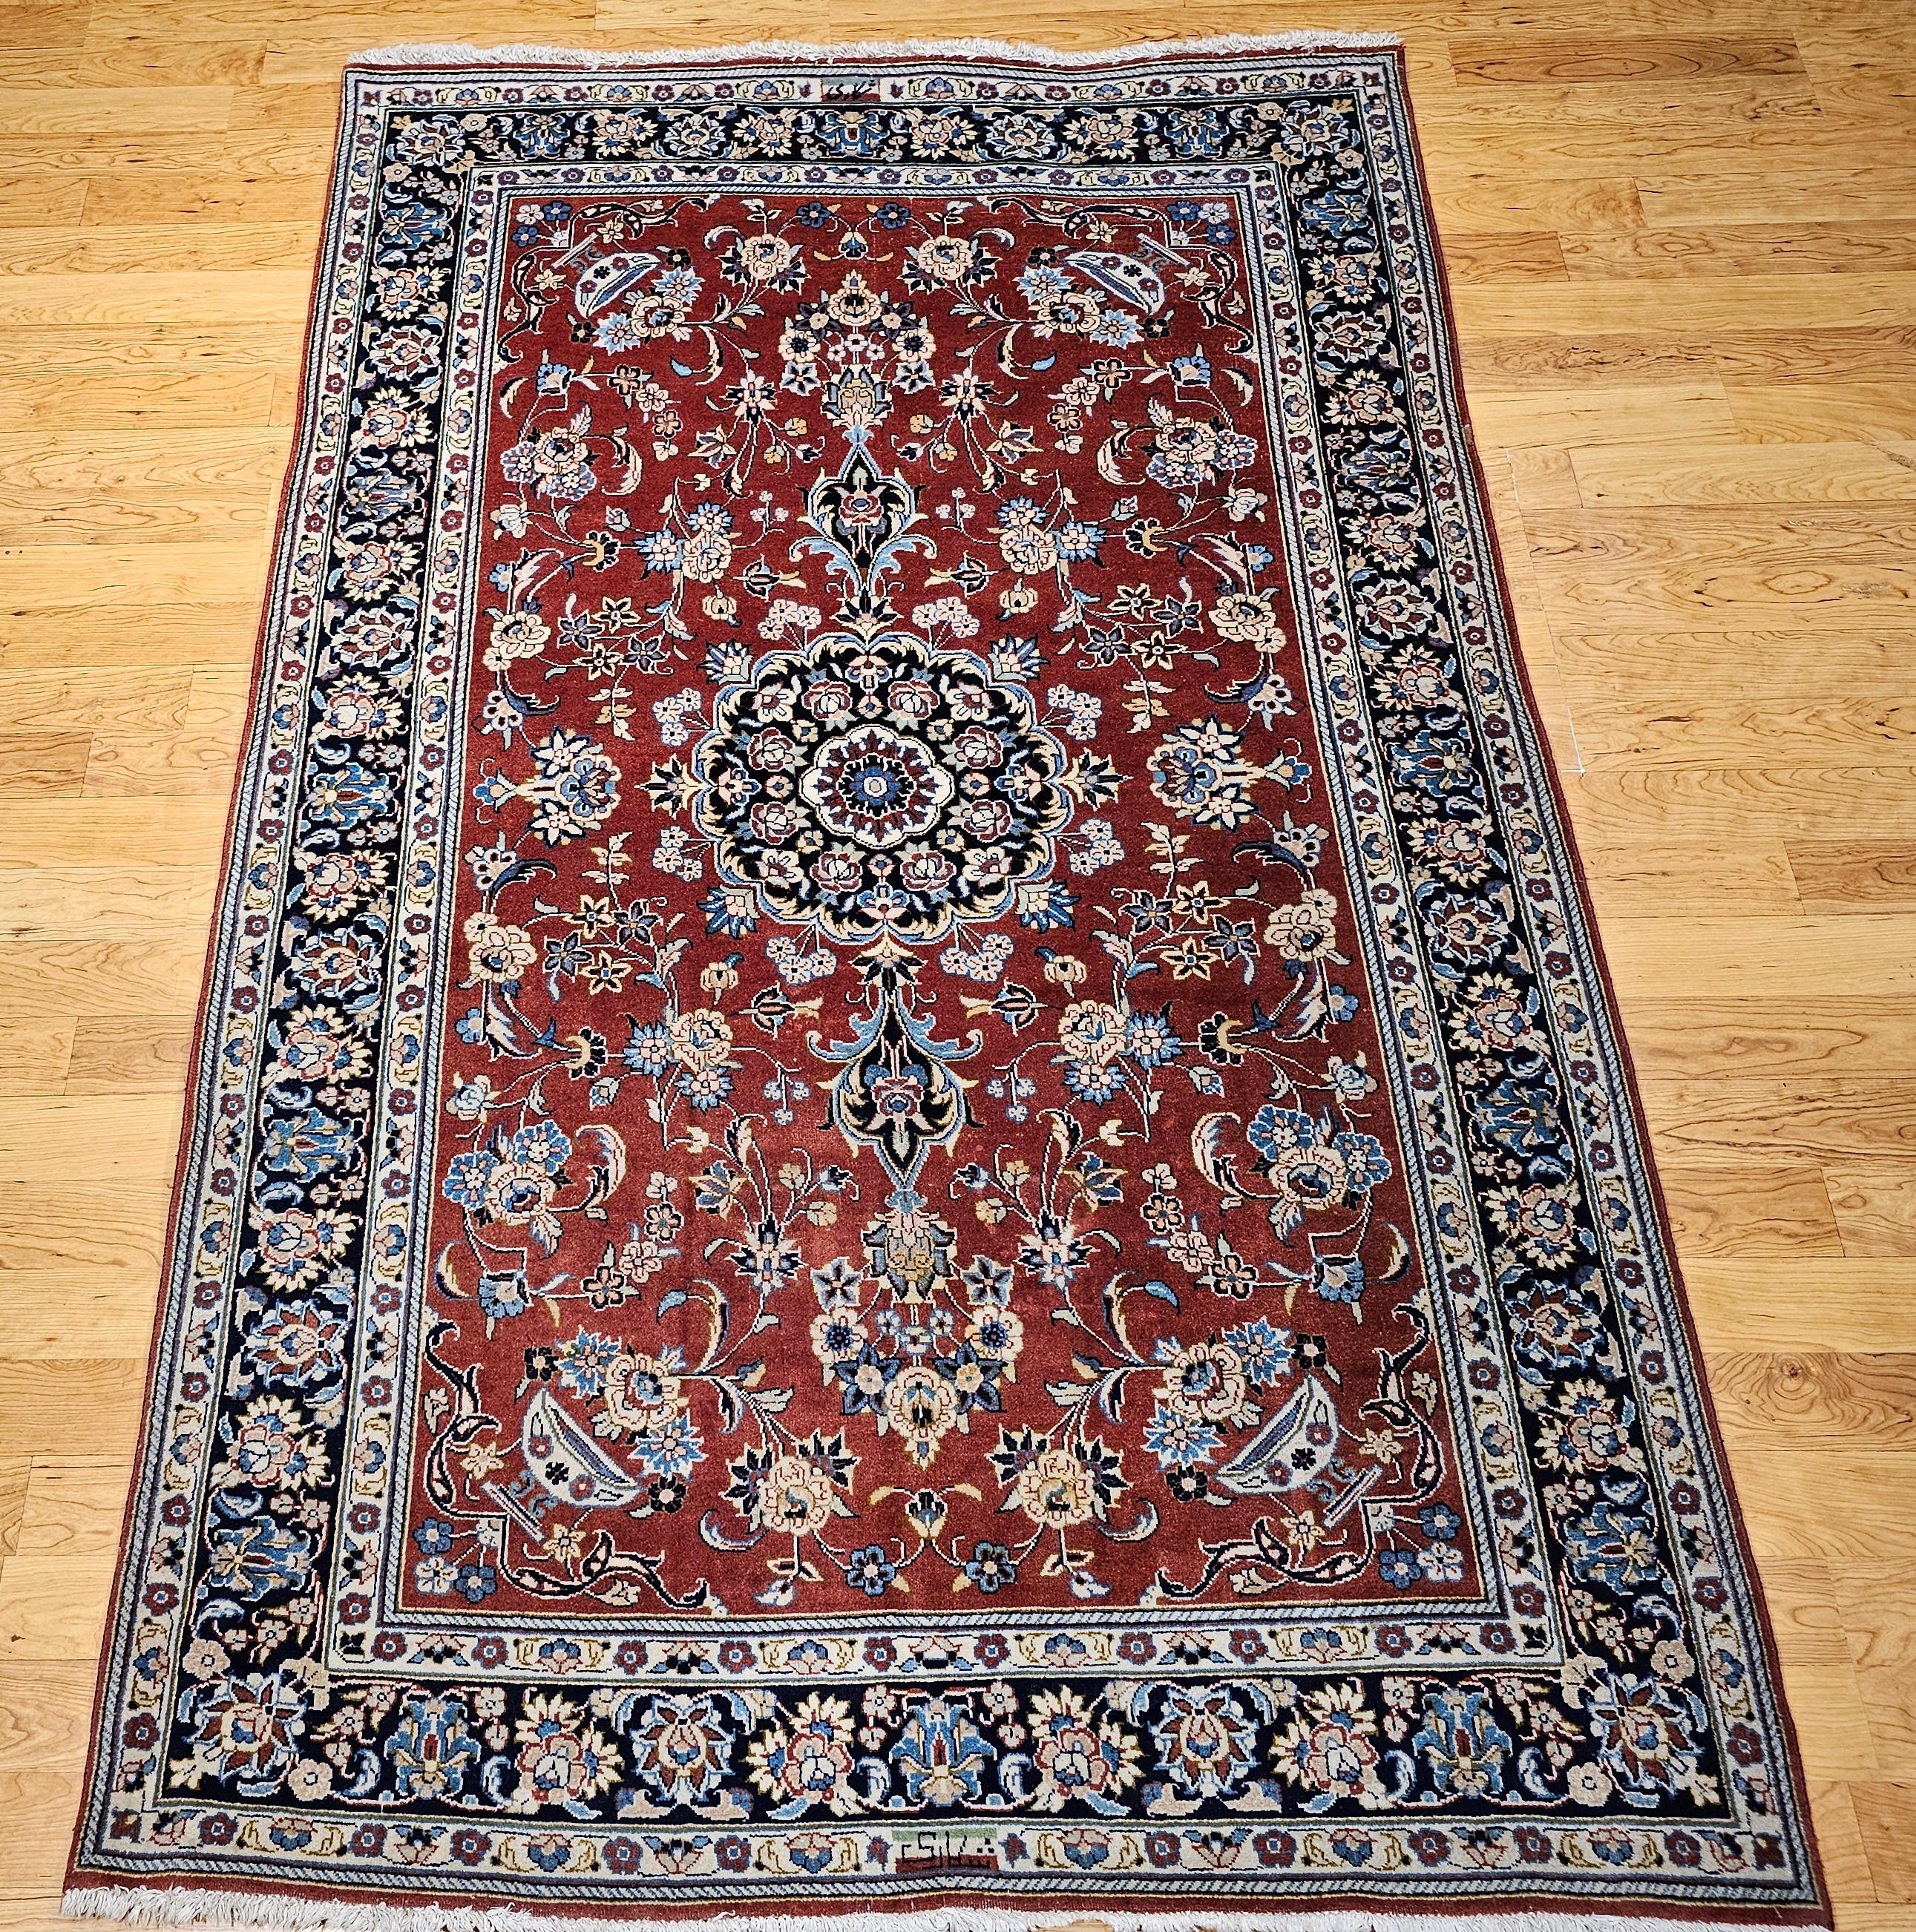 Vintage  Persian Yazd rug in a floral pattern in Brick Red, Navy, Blue, Ivory from the mid 1900s.   The was was woven at the  